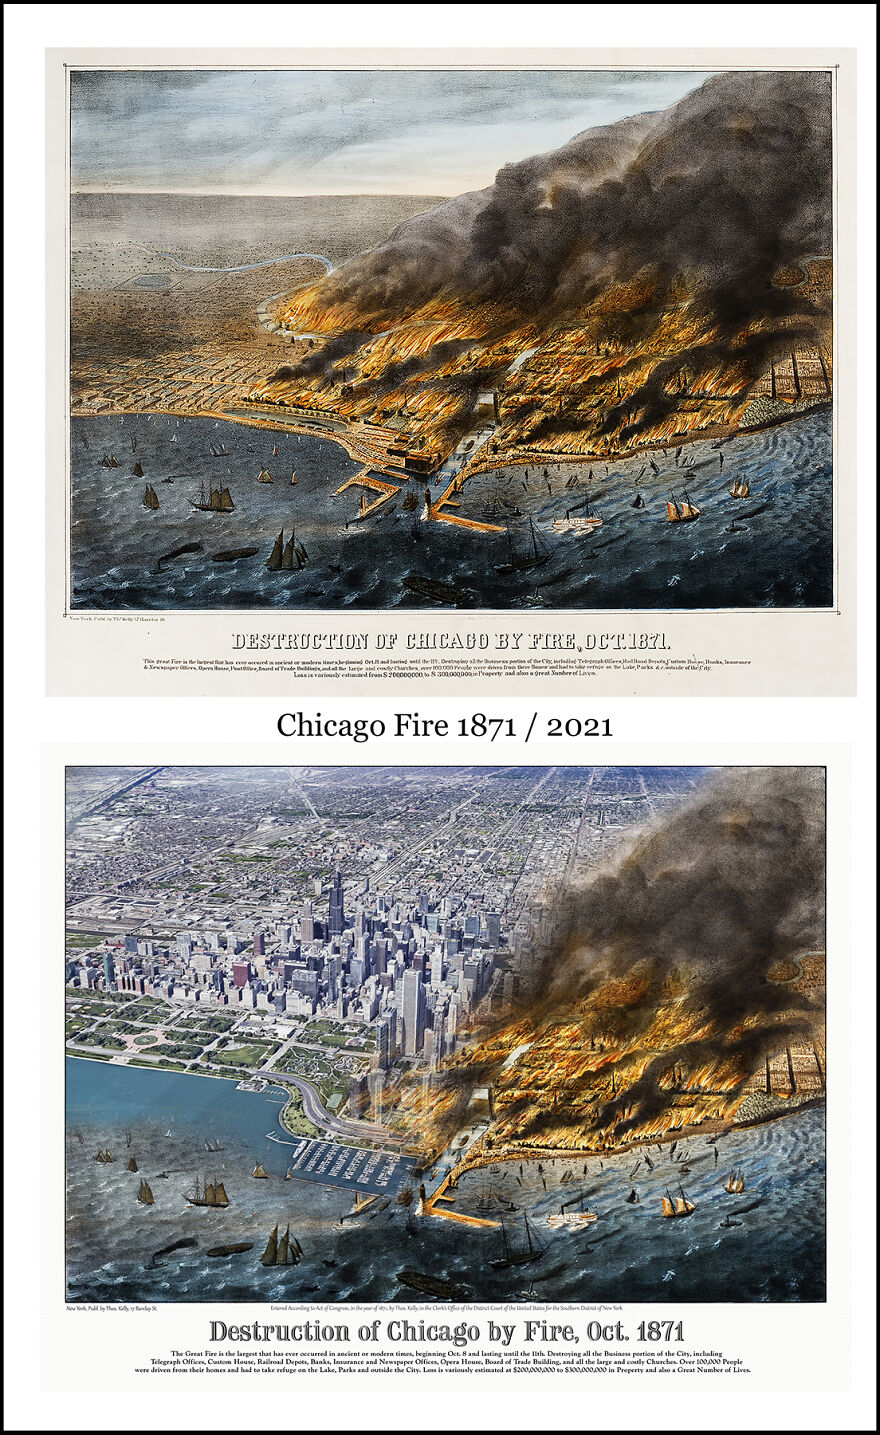 Fire! Chicago Fire Of 1871 / 2021